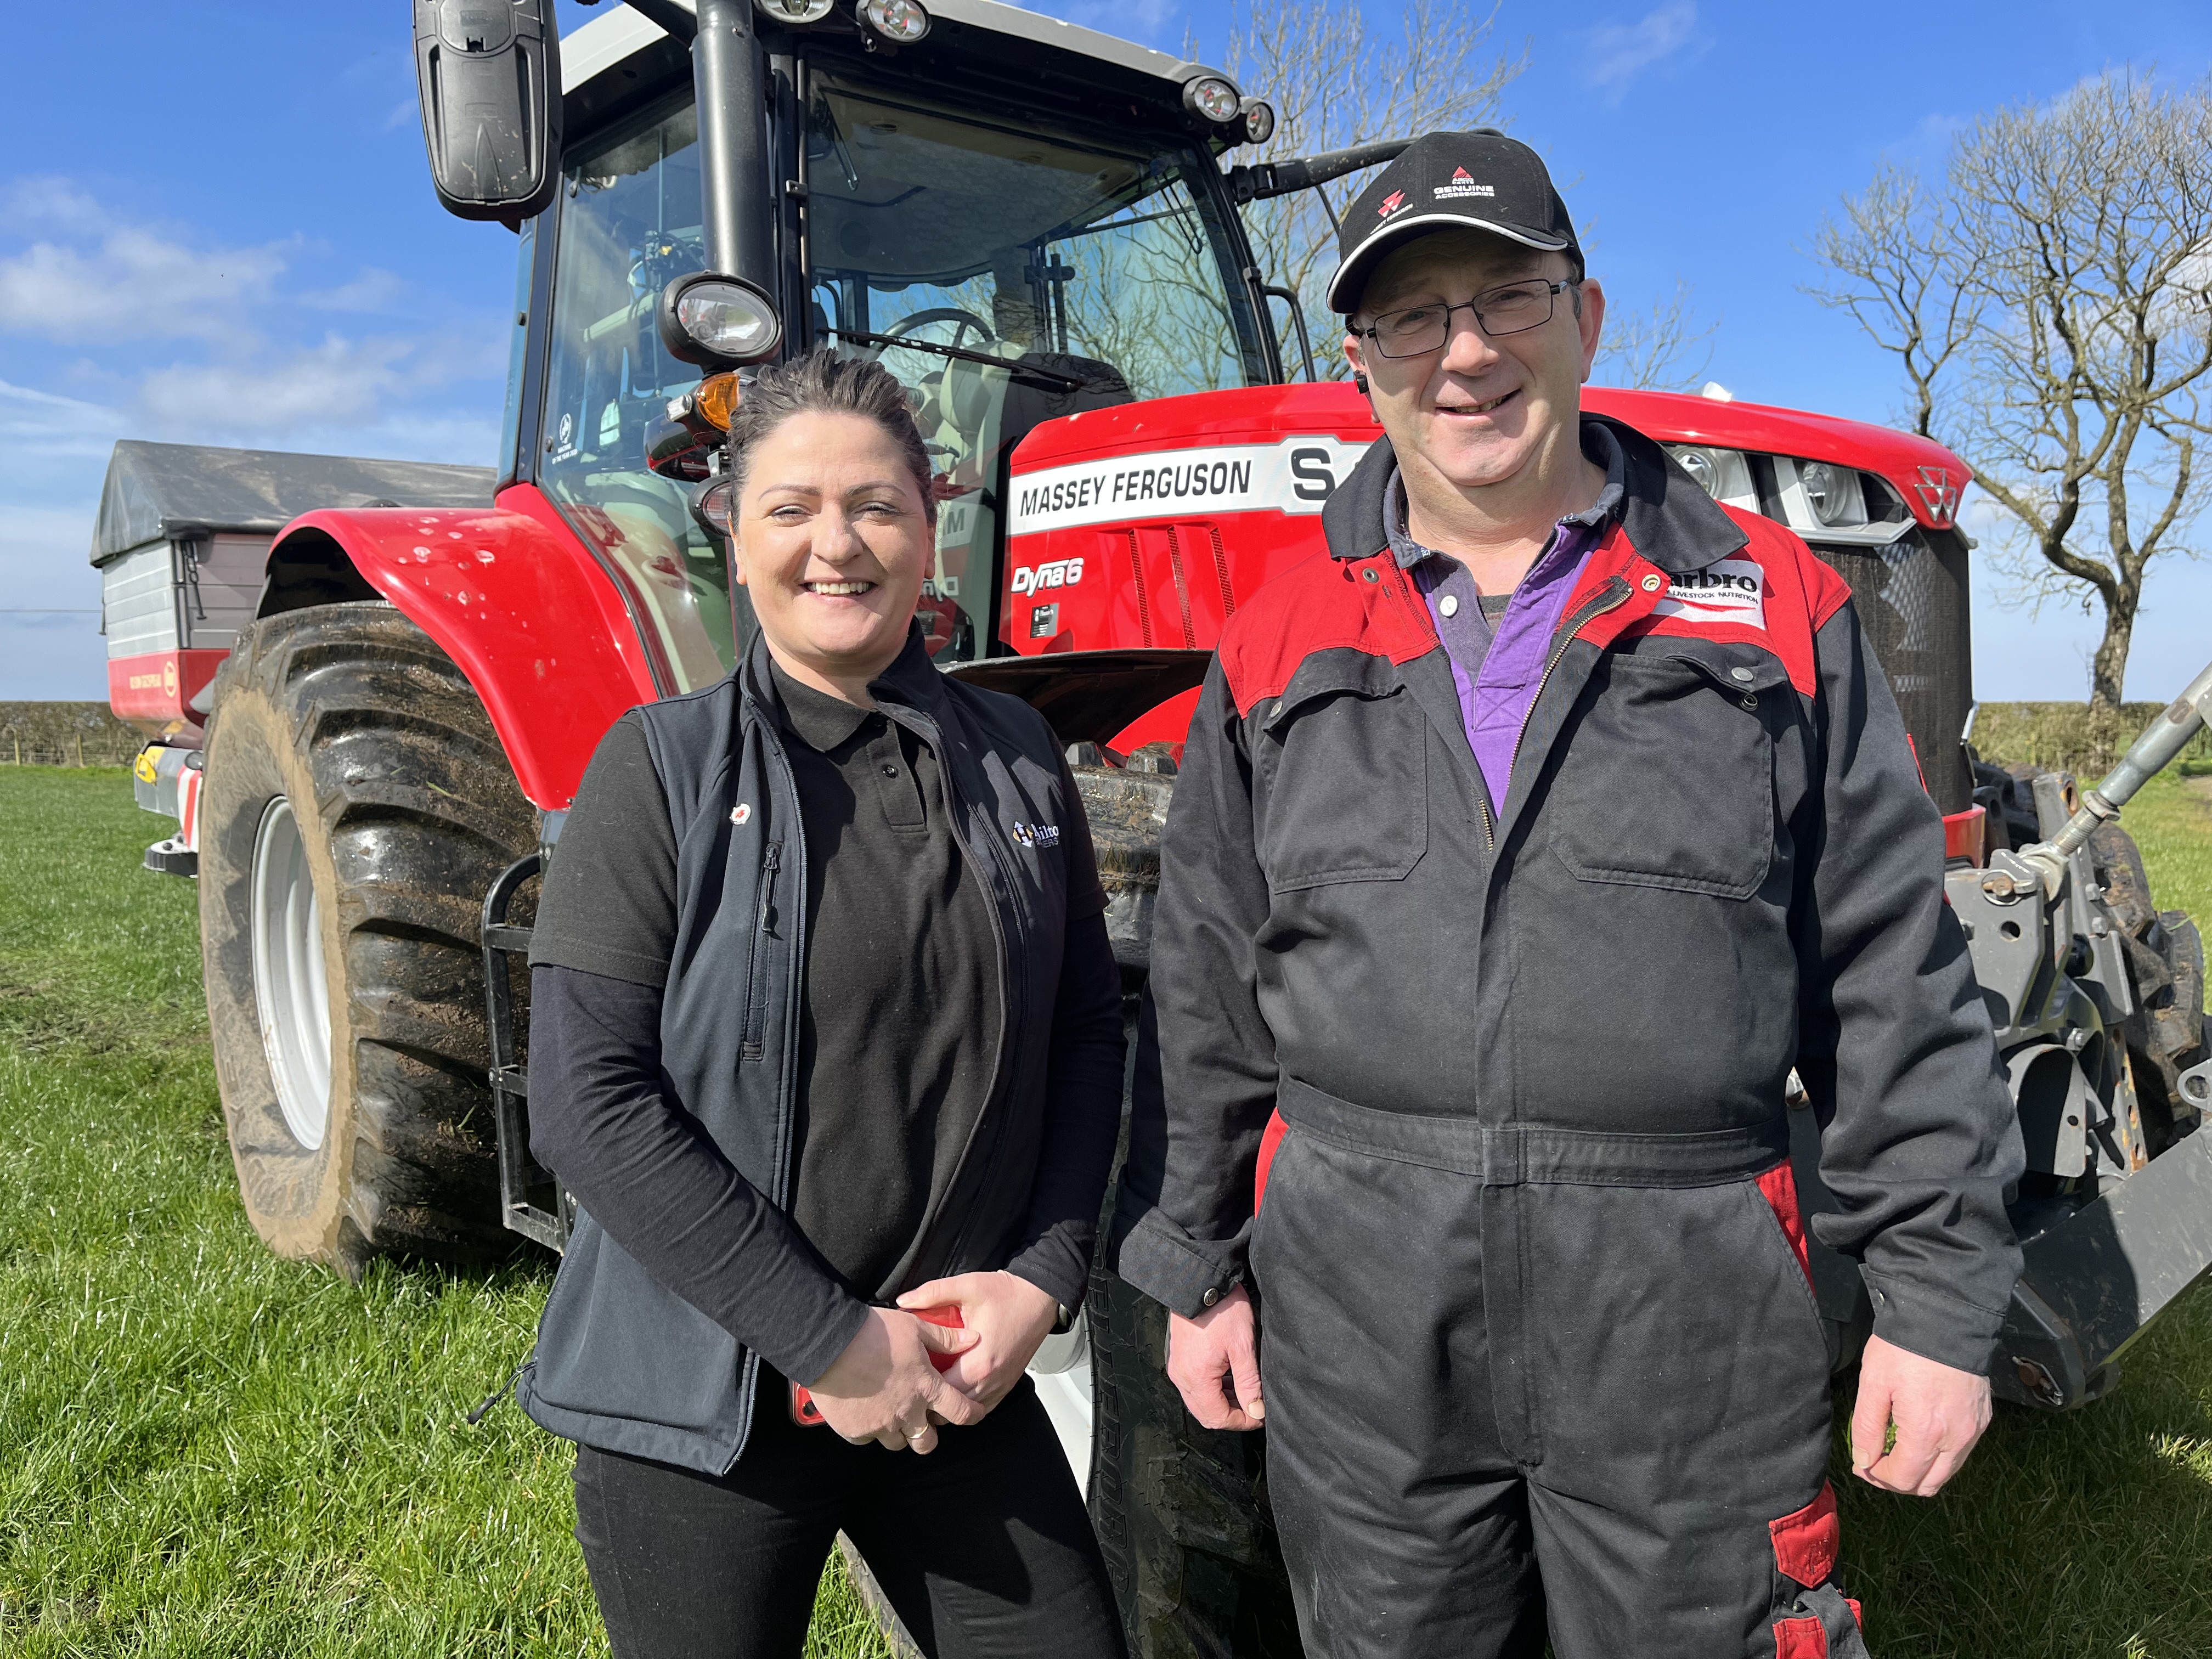 Dairy Farming with Massey Ferguson: Q&A with Graeme Kilpatrick, Owner of Craigie Mains